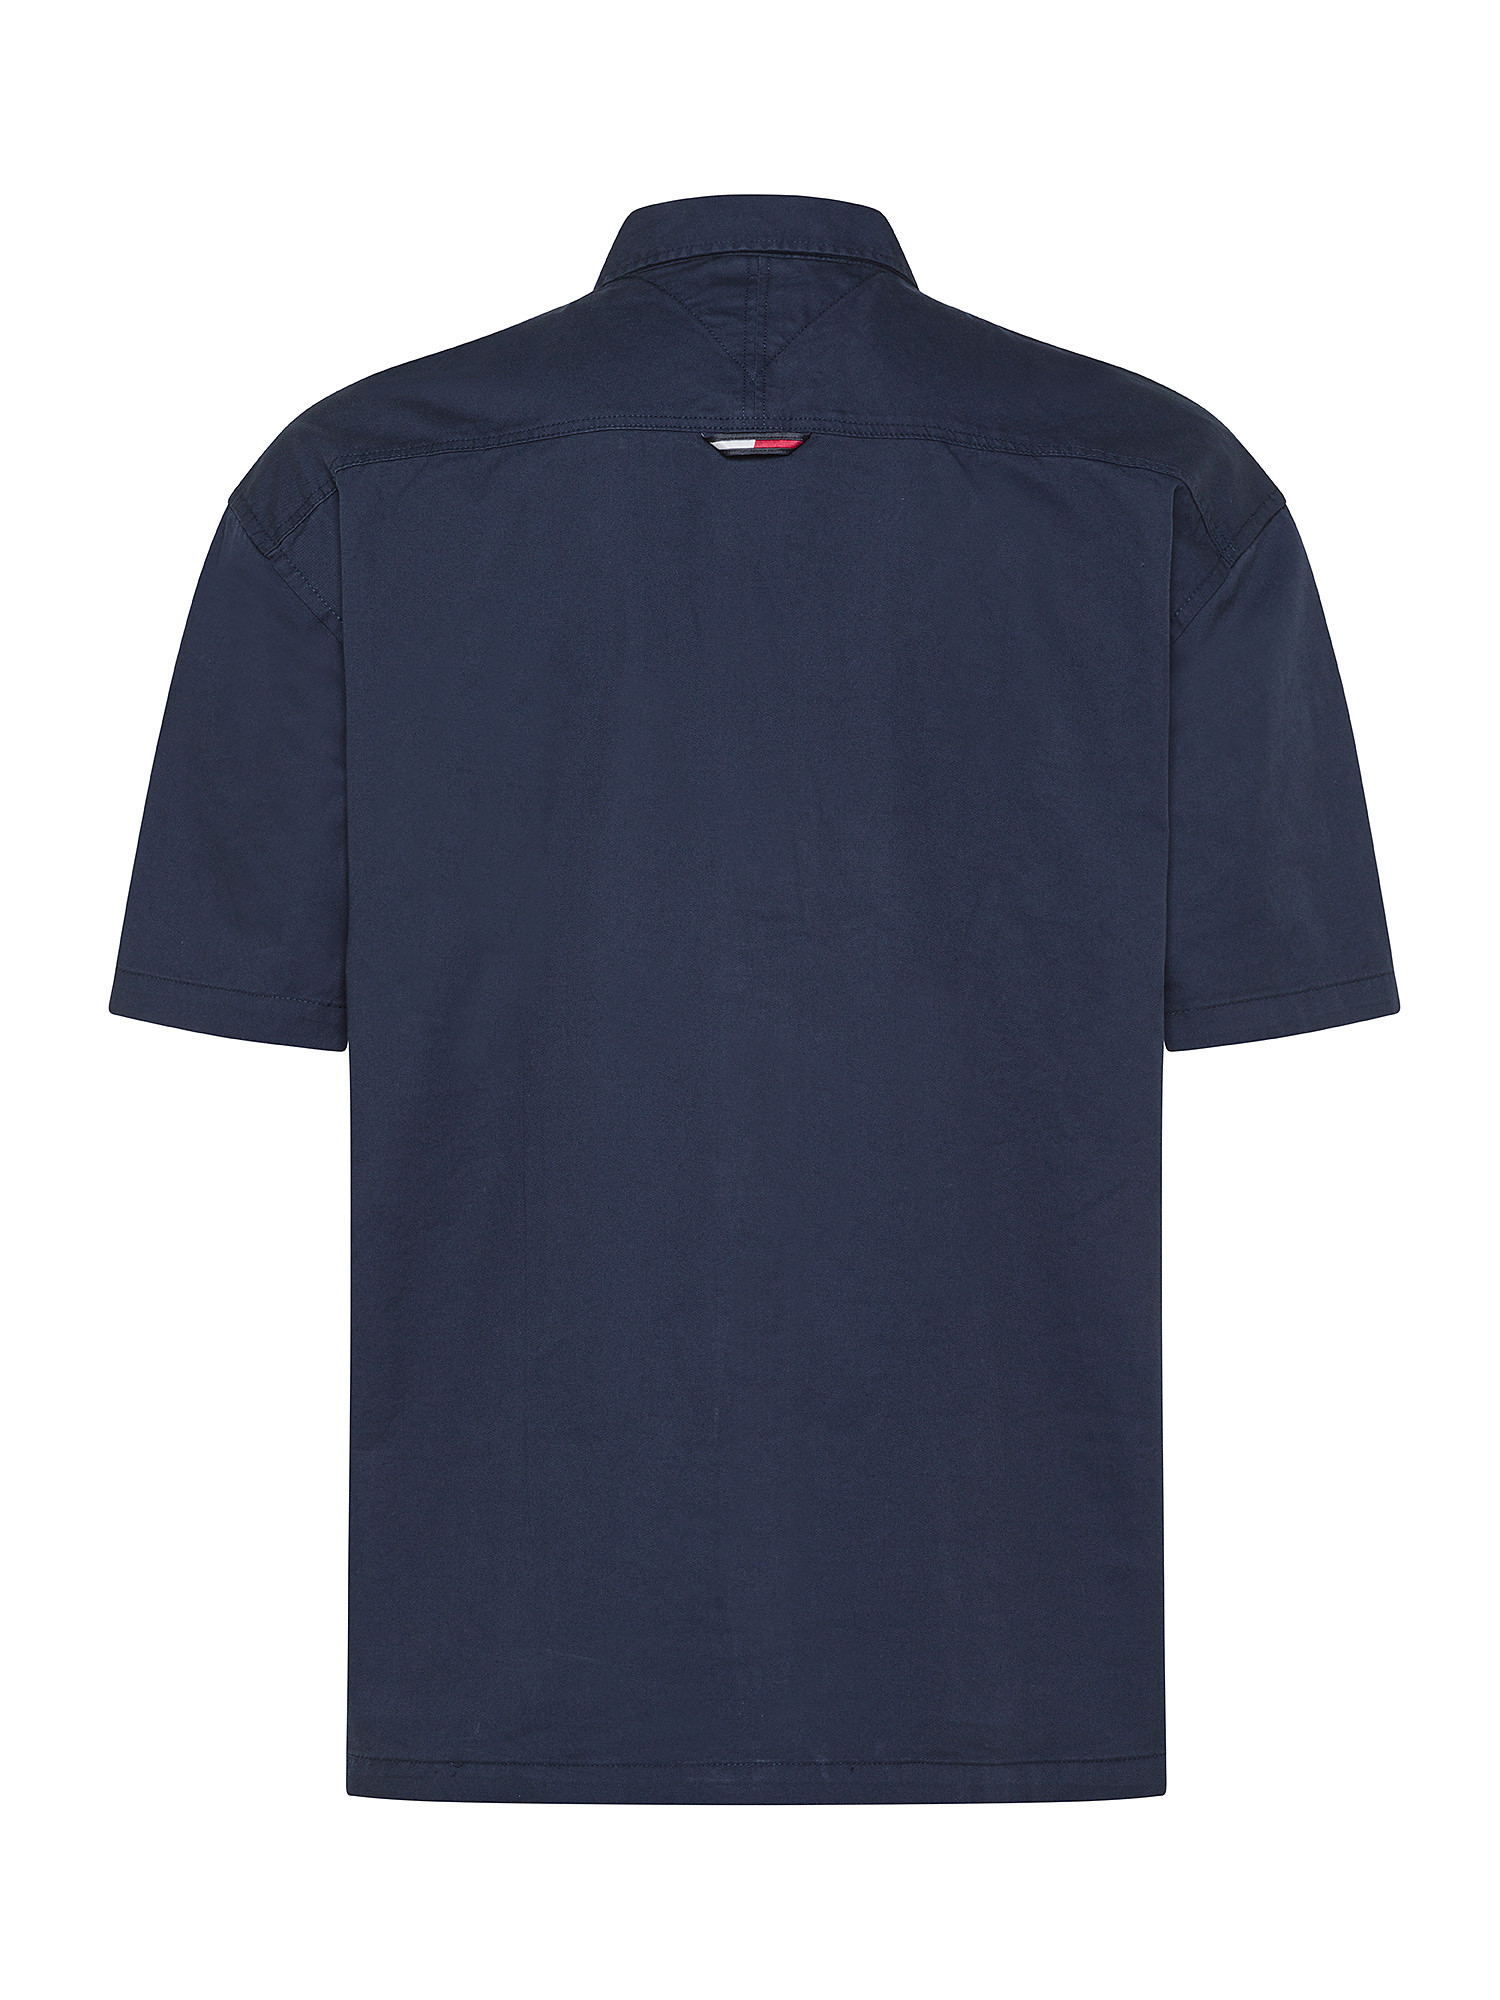 Tommy Jeans - Cotton shirt with logo, Dark Blue, large image number 1